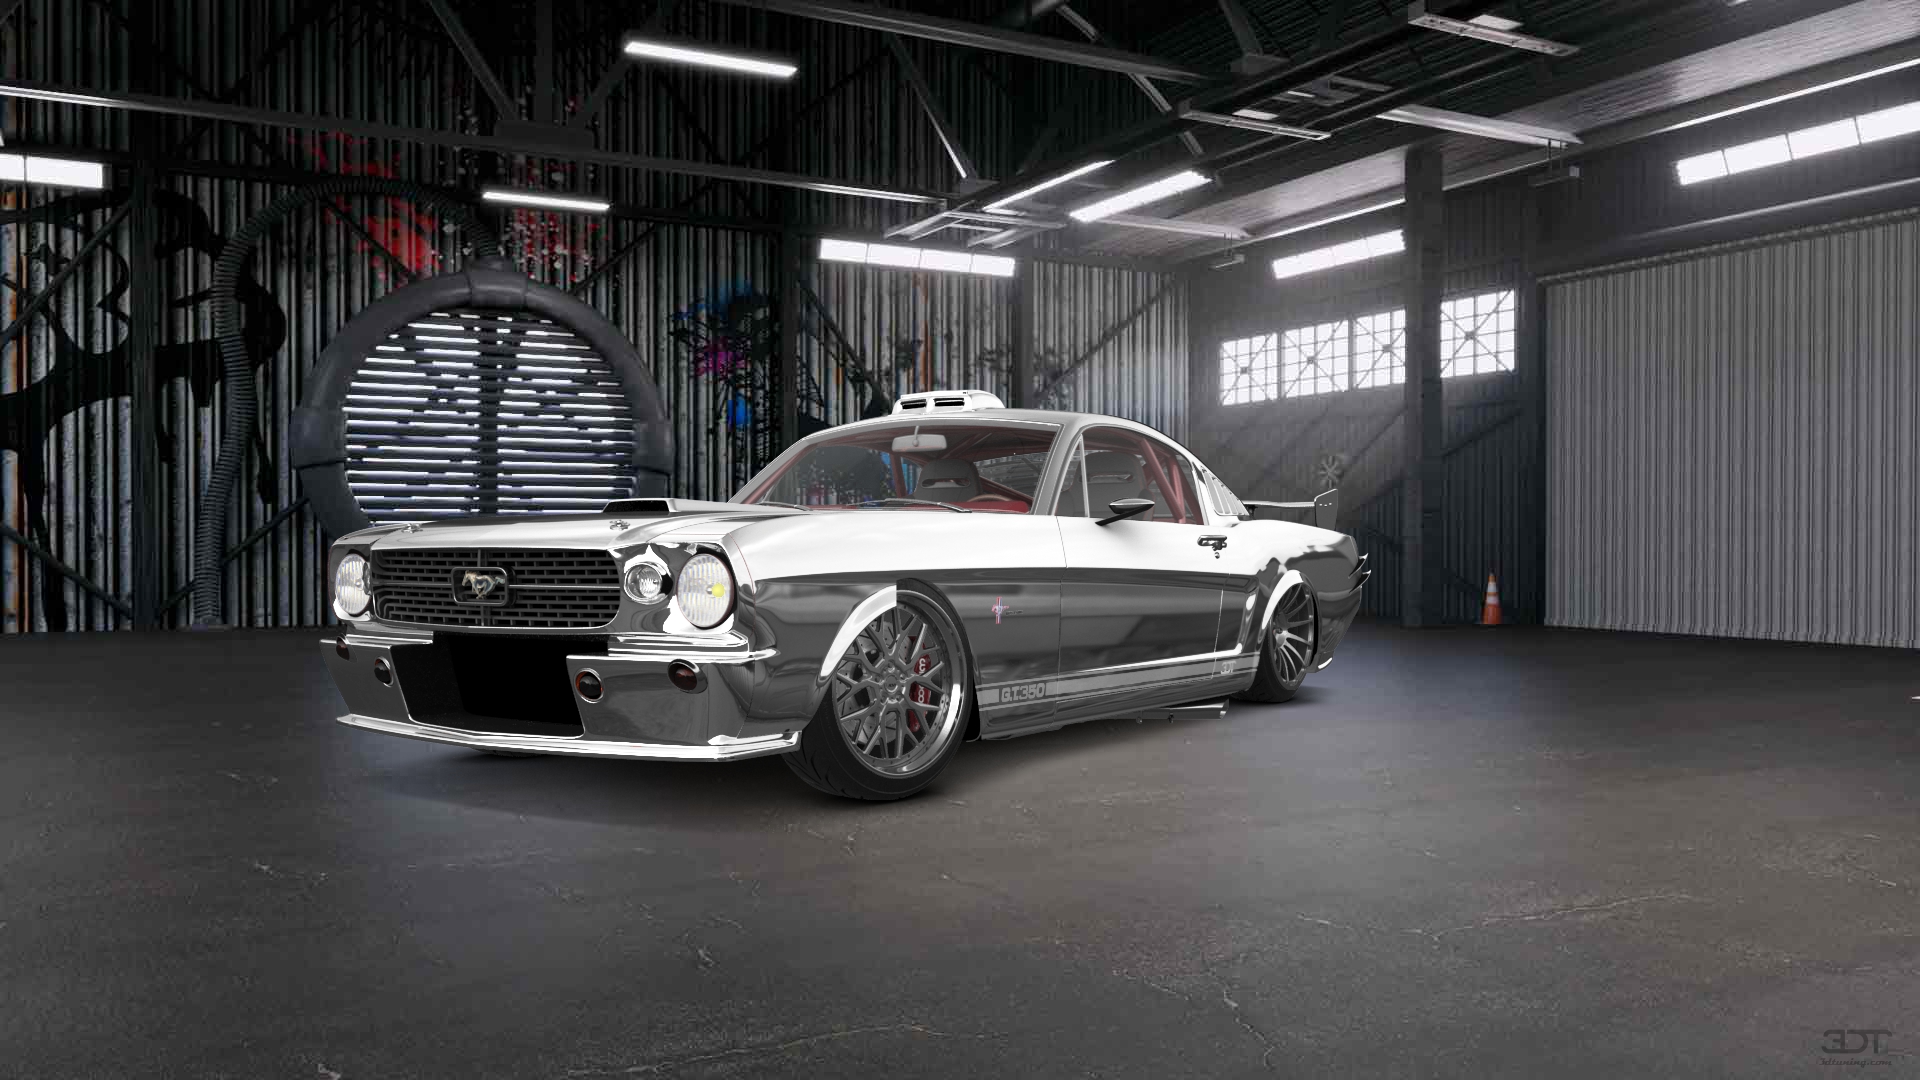 Ford Mustang challenge Fastback 3964